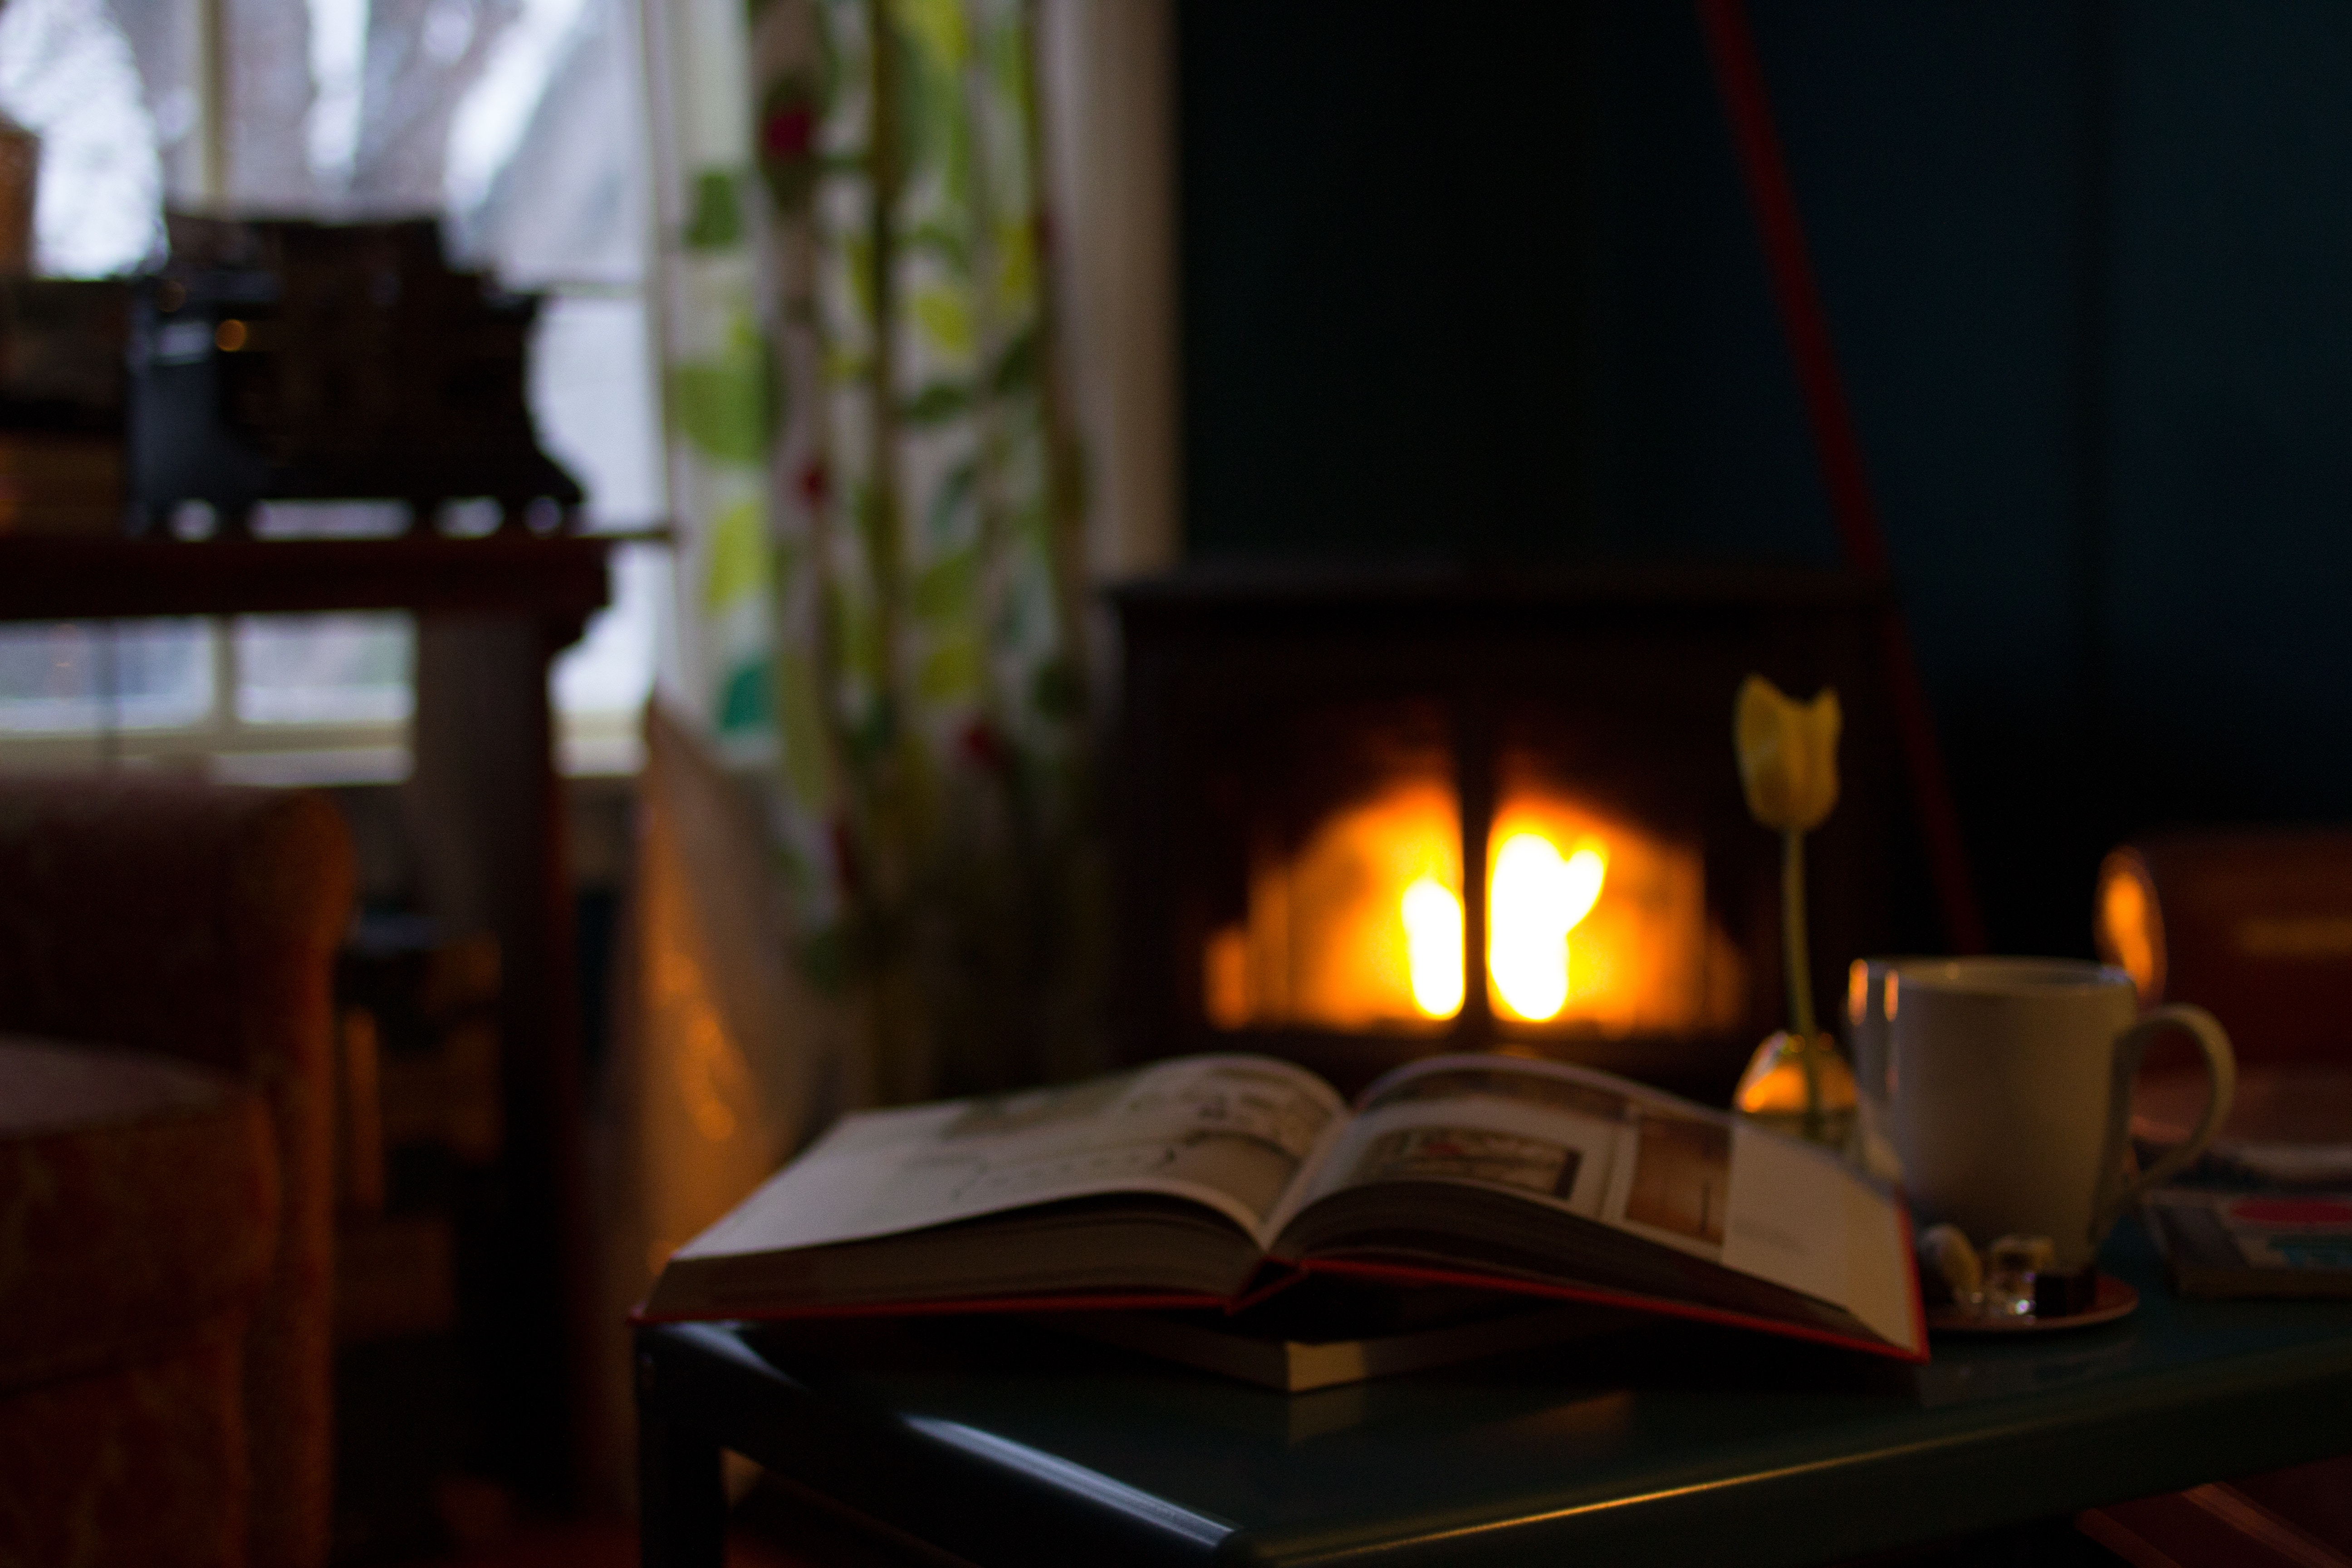 book, flower, and mug in front of fireplace